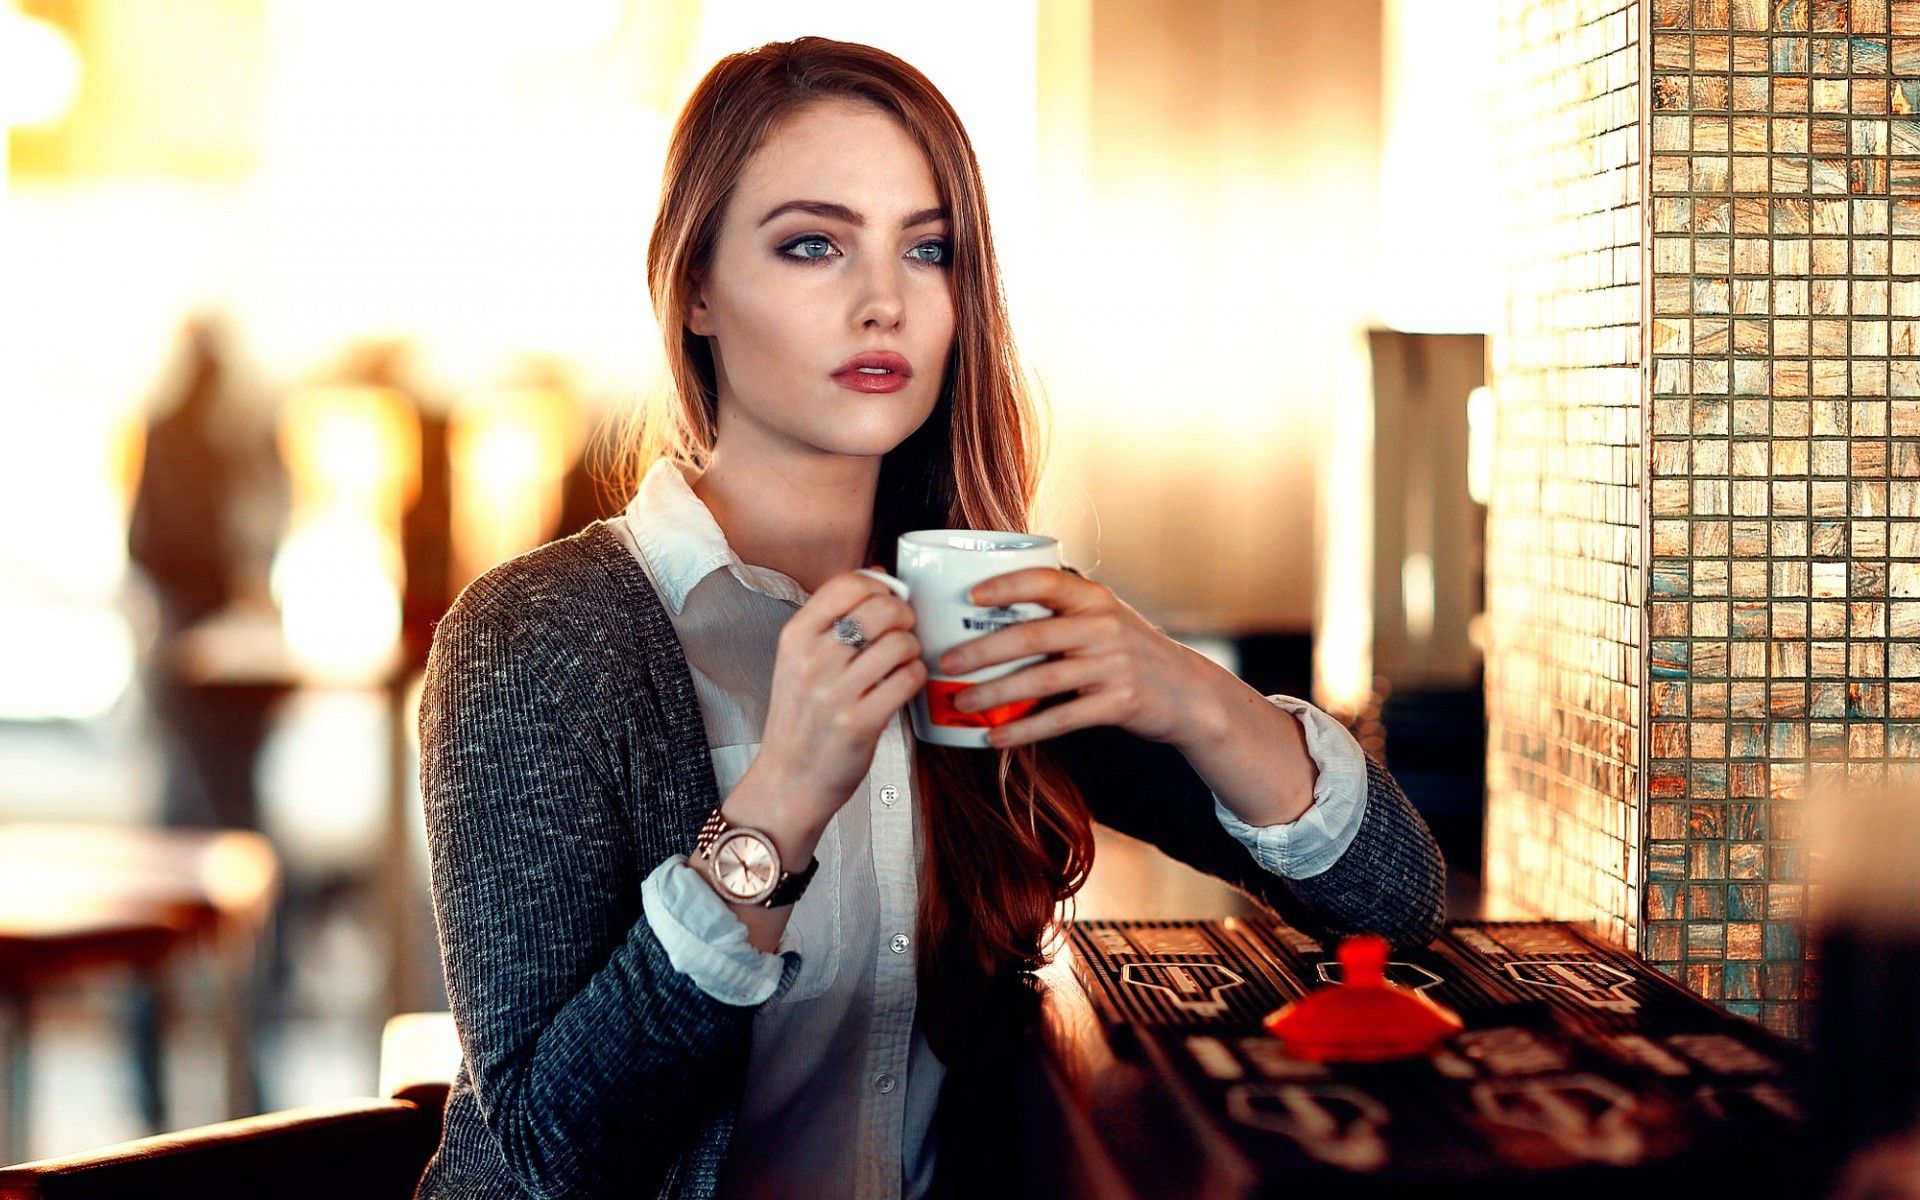 #open mouth, #blouses, #redhead, #long hair, #depth of field, #Alessandro Di Cicco, #model, #women, #watches, #sitting, #sweater, #blue eyes, #looking away, #cup, #restaurant wallpaper. Mocah.org HD Wallpaper